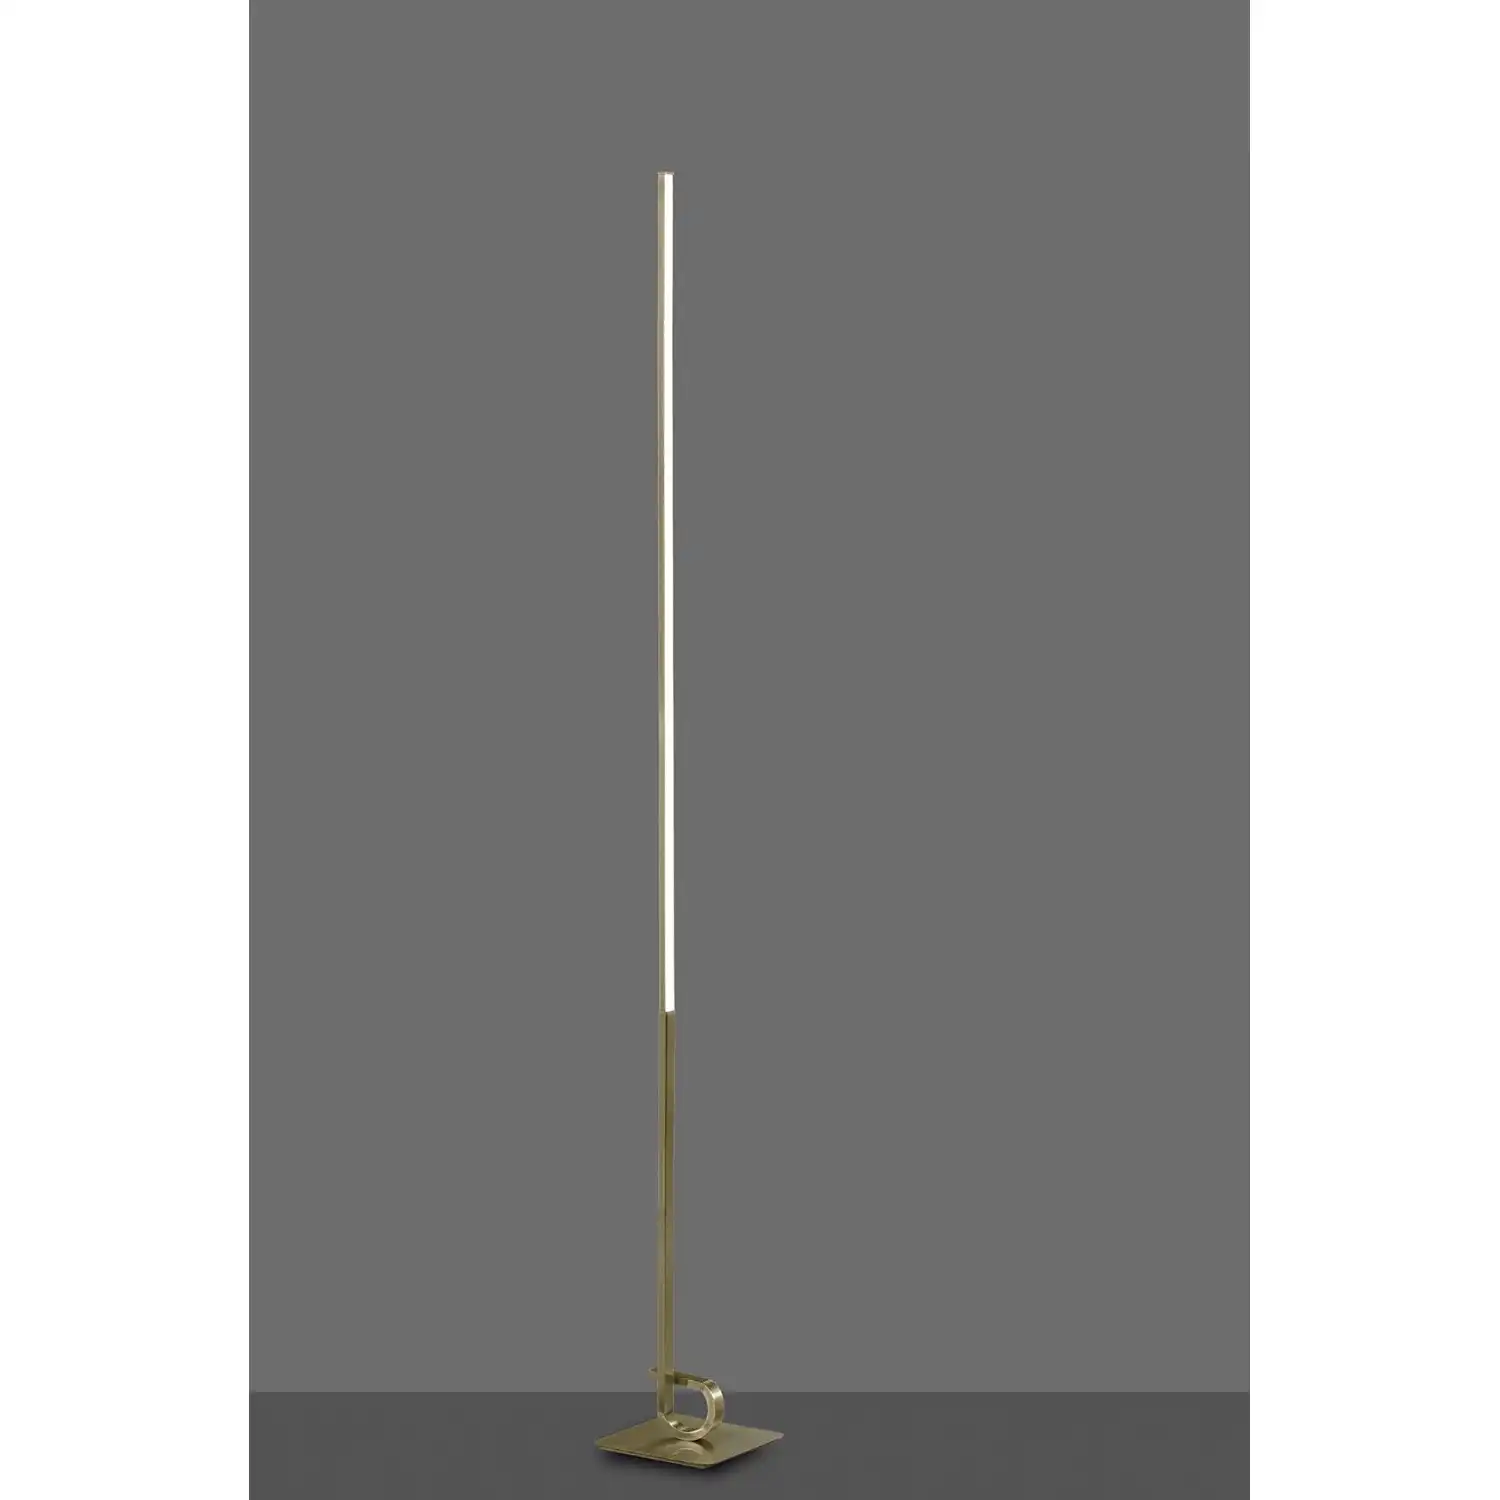 Cinto Floor Lamp 175cm, 20W LED, 3000K, 1600lm Dimmable, Antique Brass, 3yrs Warranty